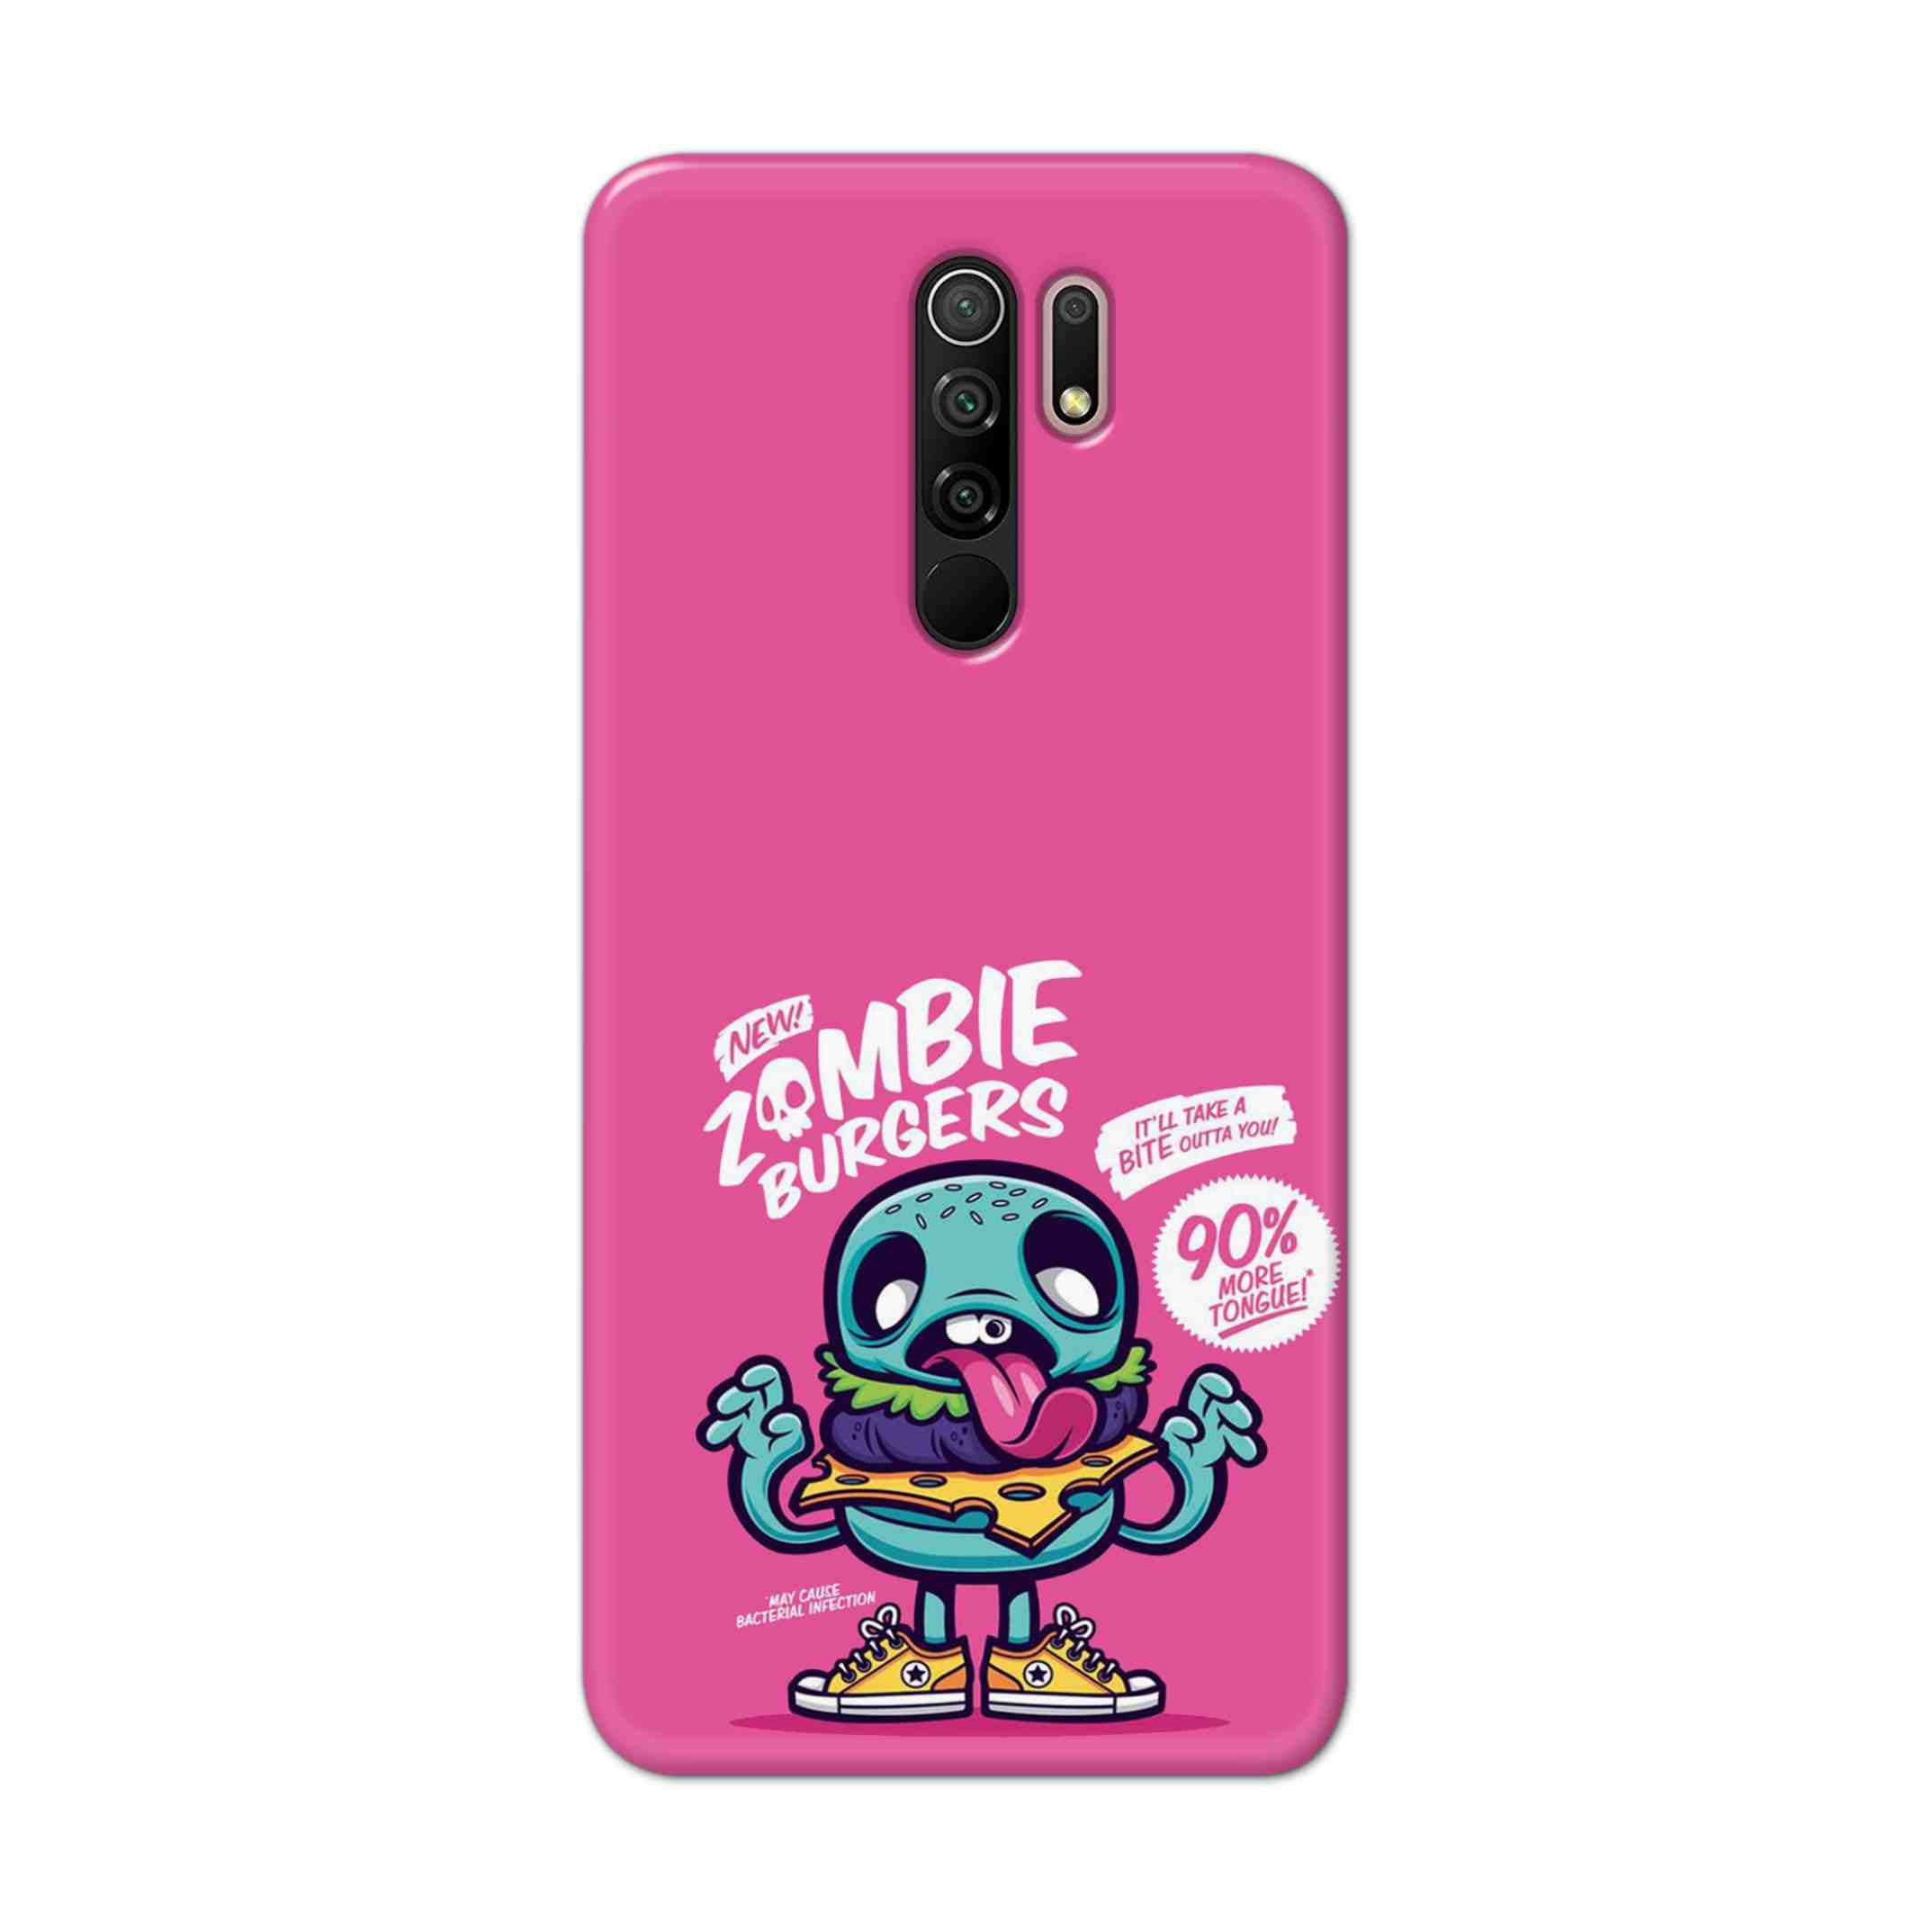 Buy New Zombie Burgers Hard Back Mobile Phone Case Cover For Xiaomi Redmi 9 Prime Online